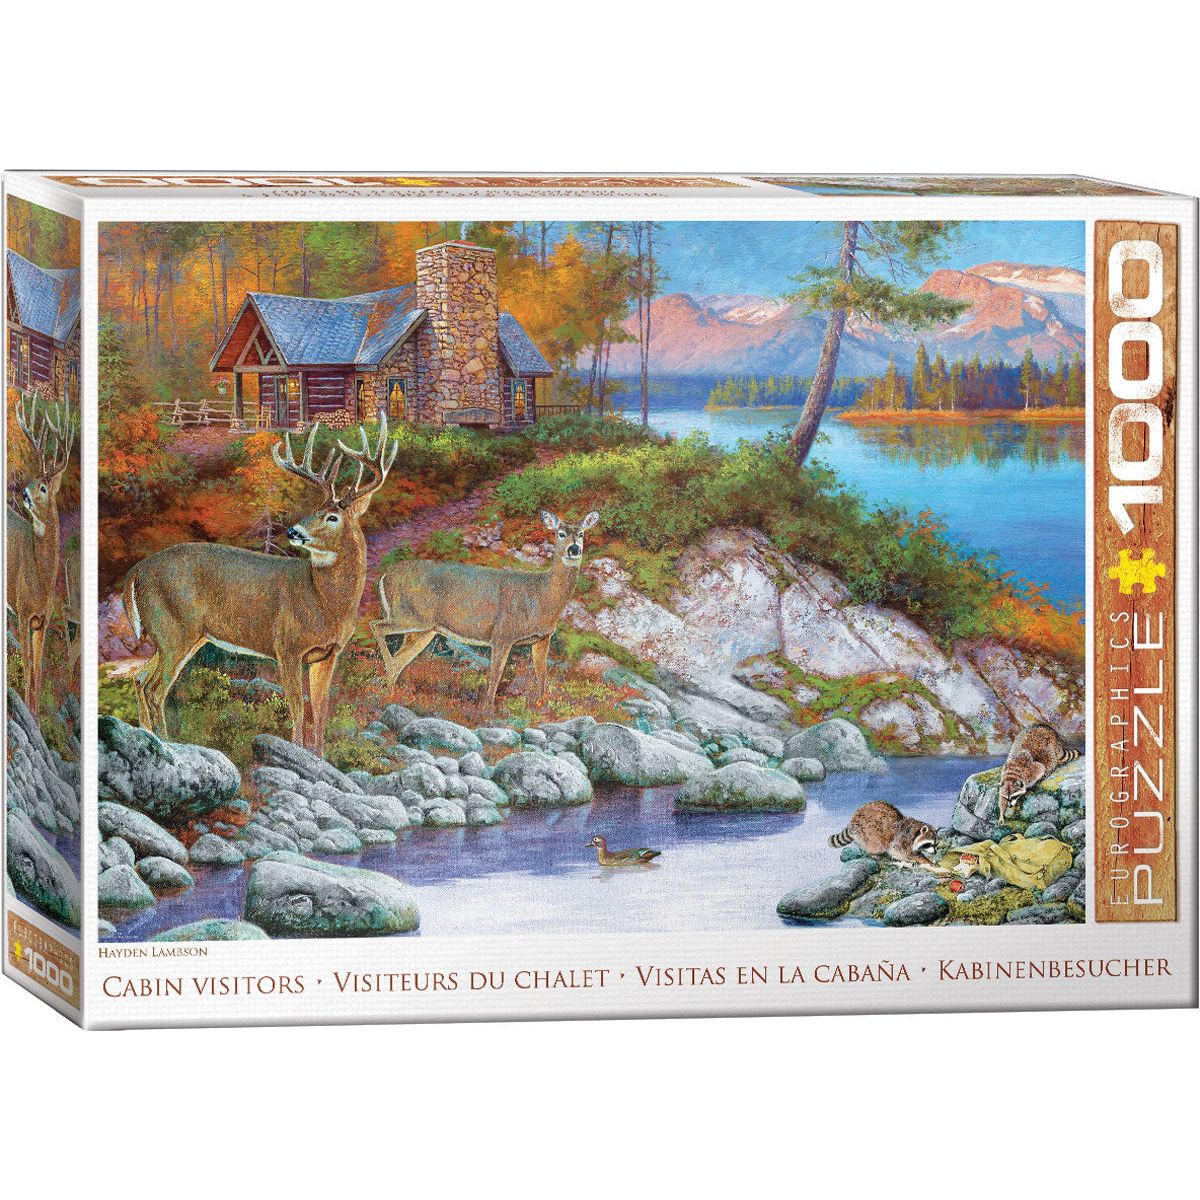 Cabin Visitors by HLambson 1000PC Puzzle  Eurographics - Zinnias Gift Boutique